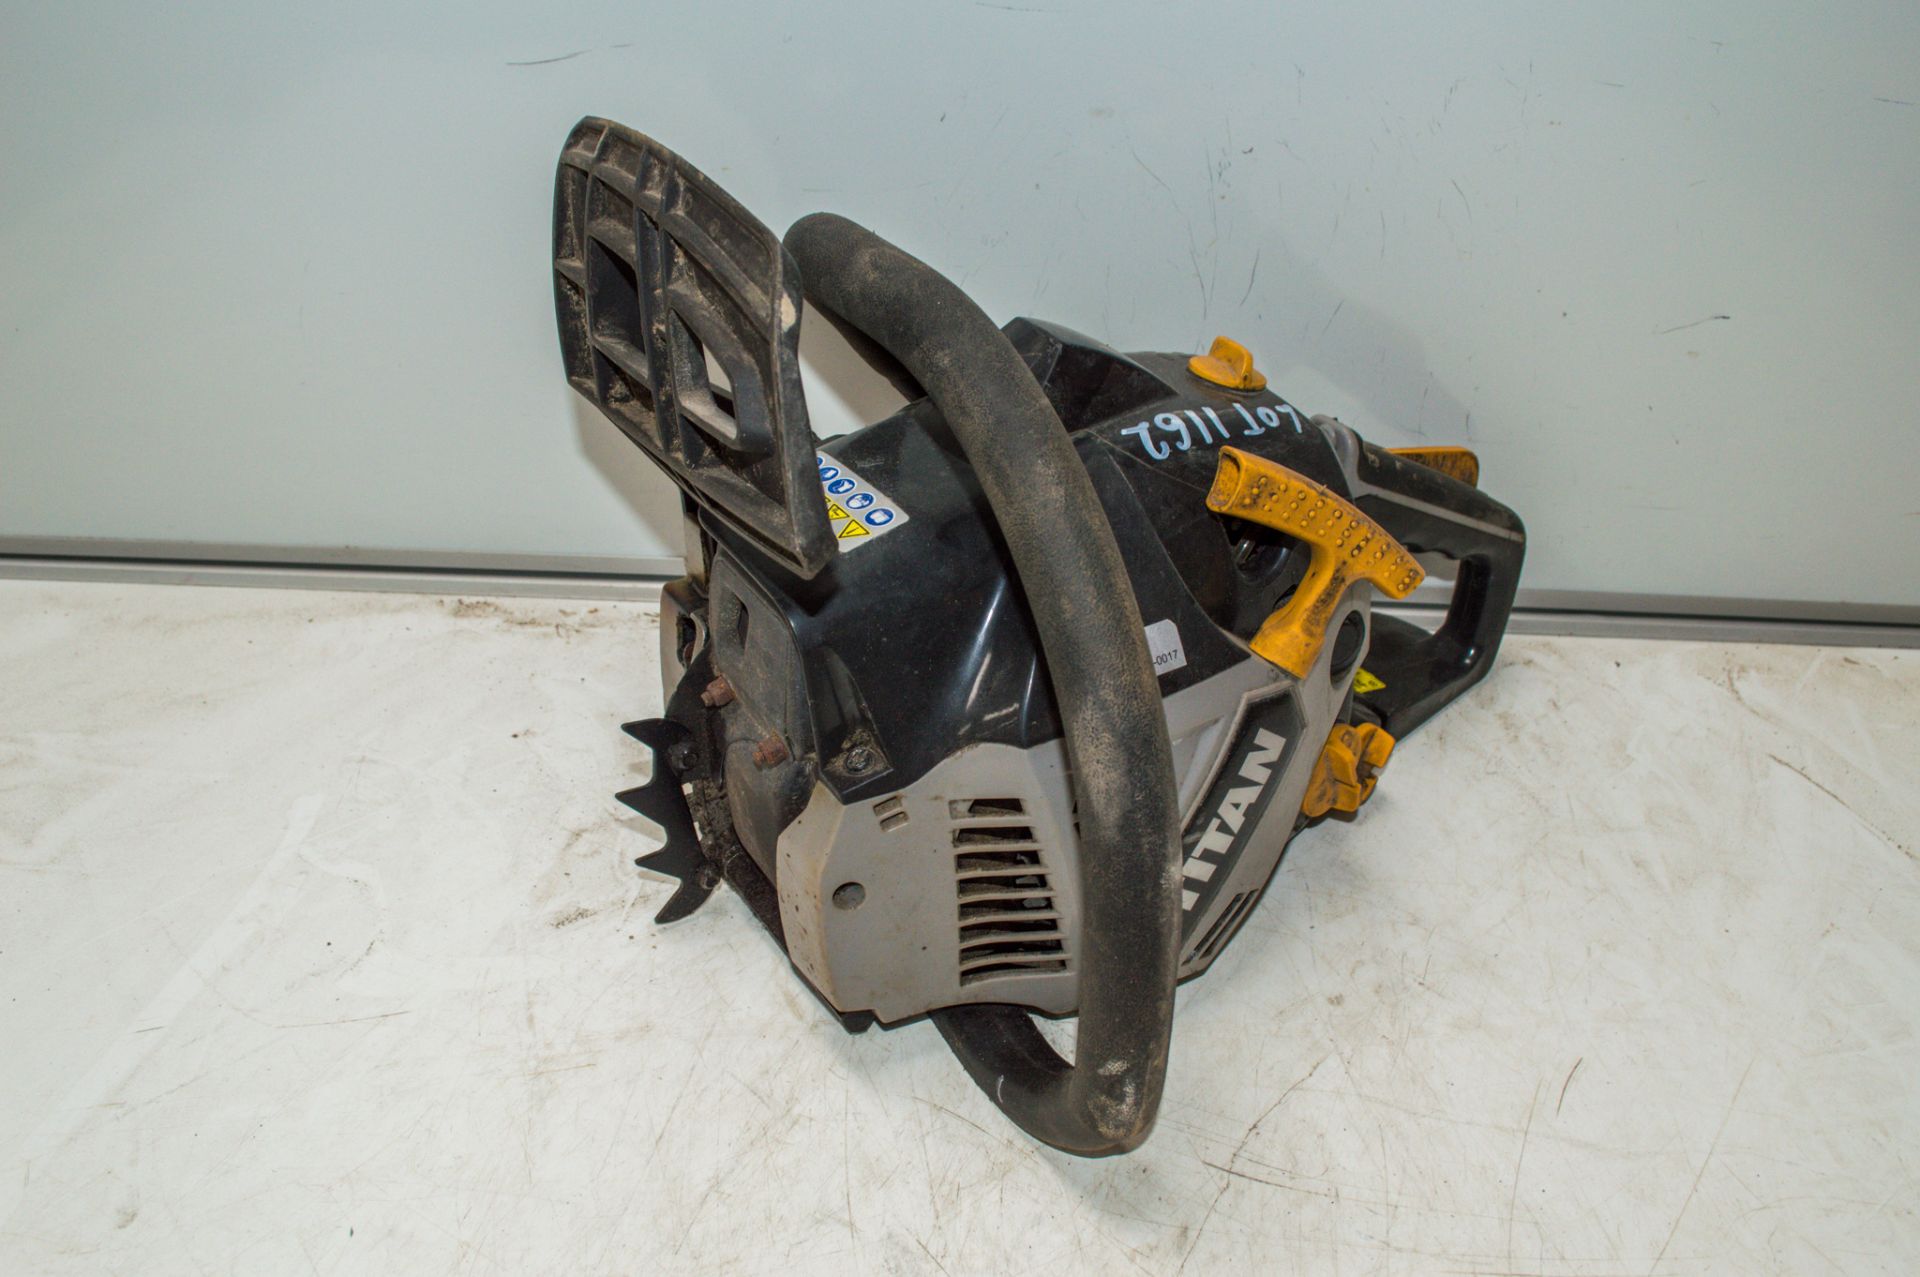 Titan petrol driven chainsaw ** No bar or chain ** ** No VAT on hammer price but VAT will be charged